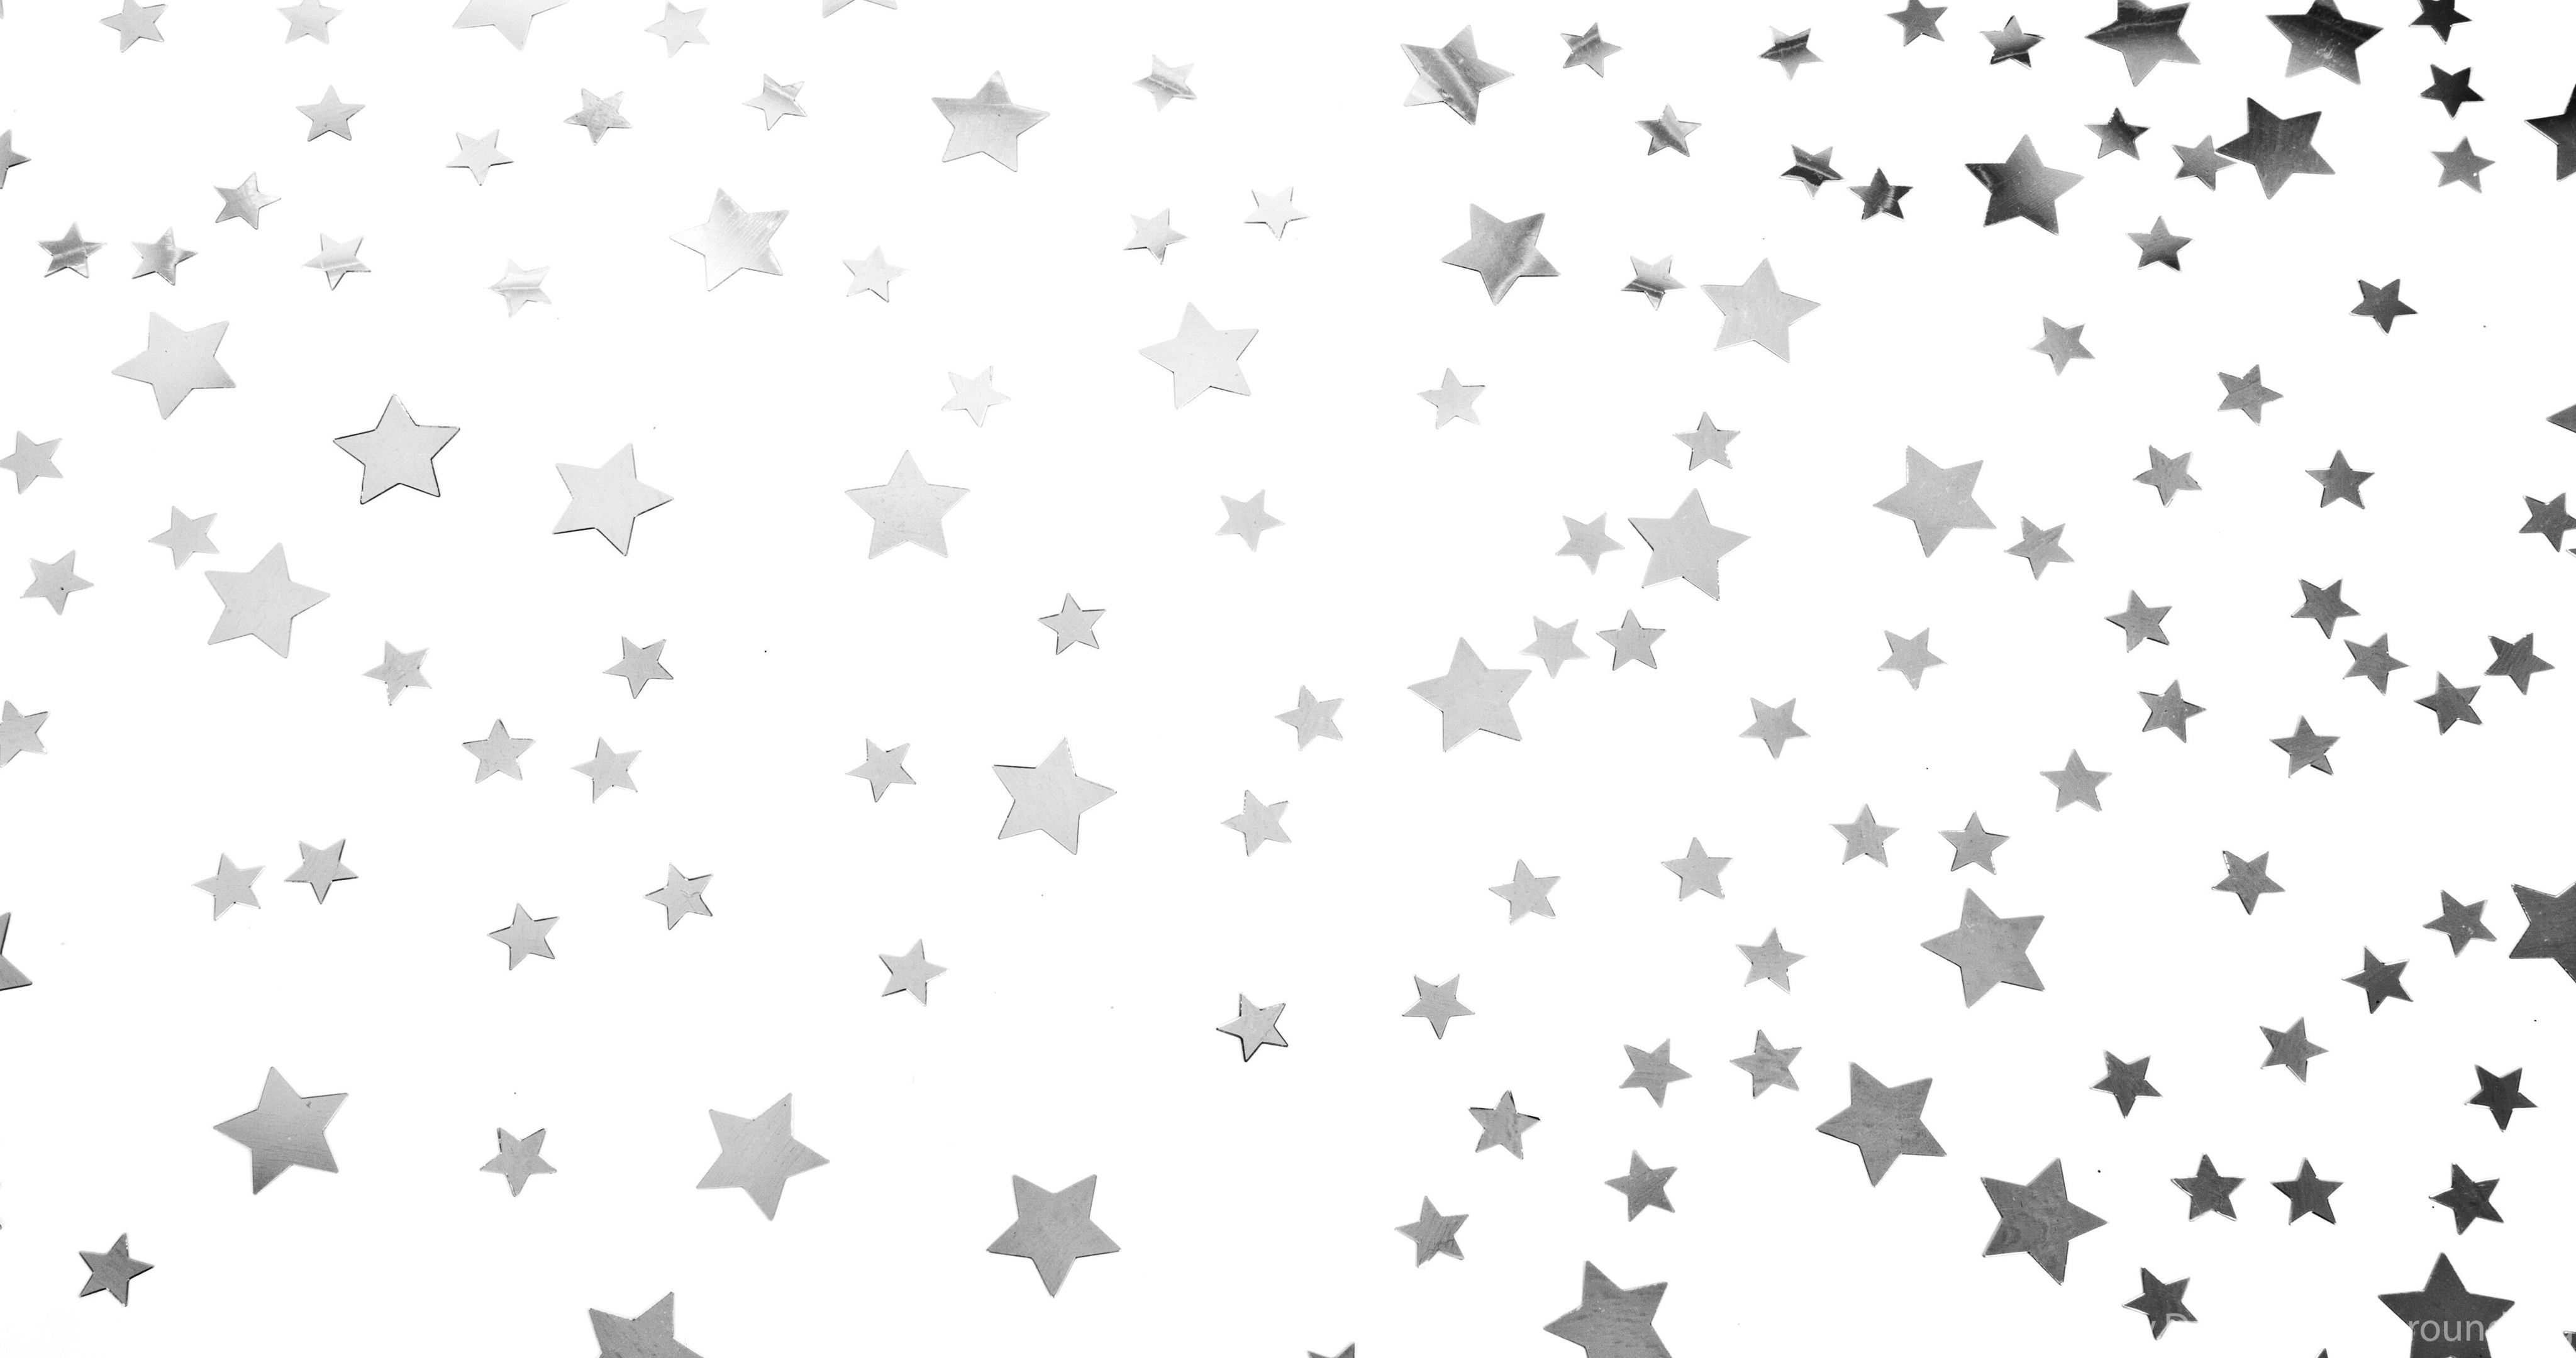 35 Stars At Xmas Background Images, Cards Or Christmas Wallpapers ...